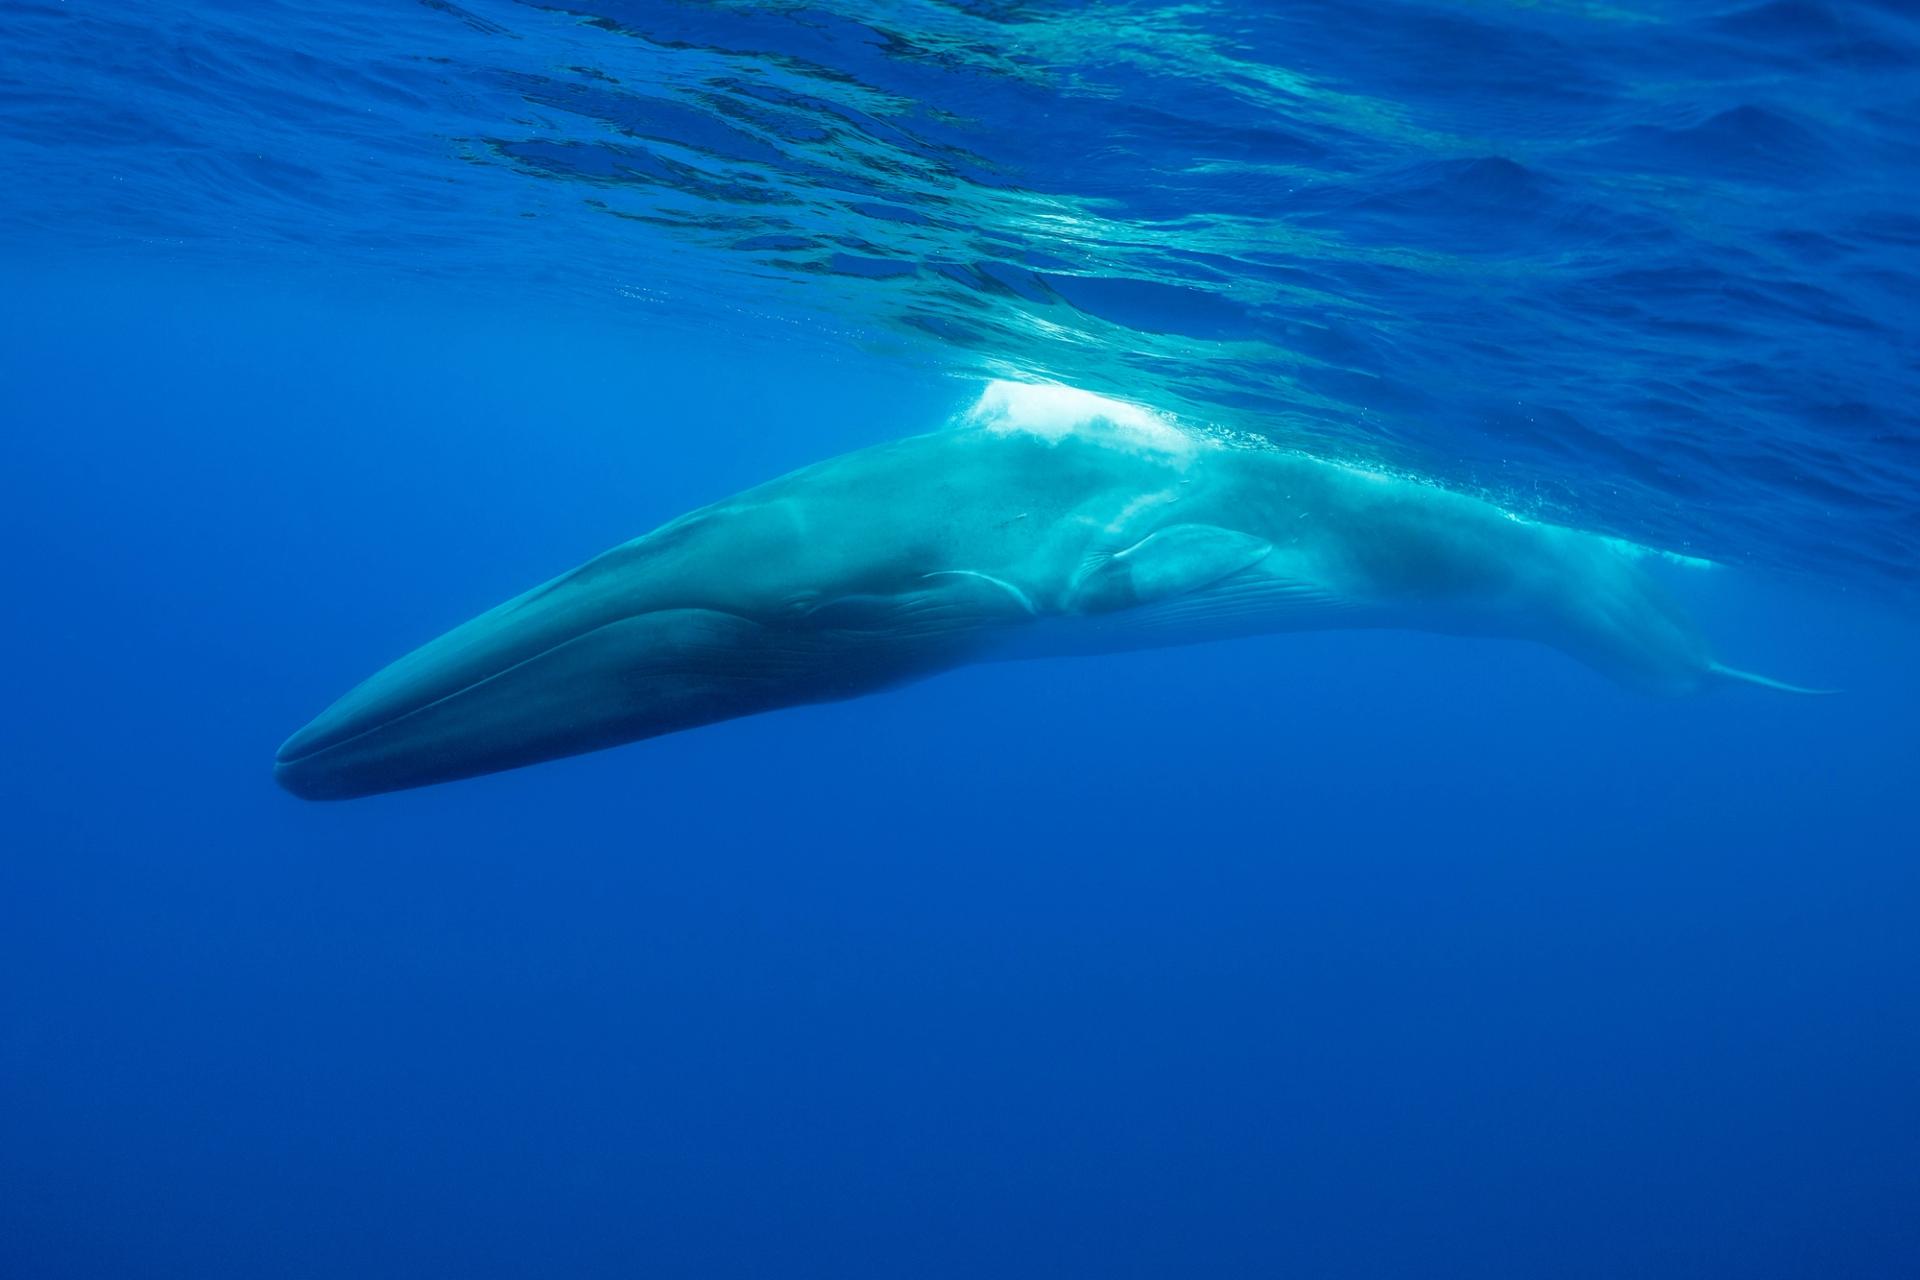 A fin whale swimming in the ocean in Iceland